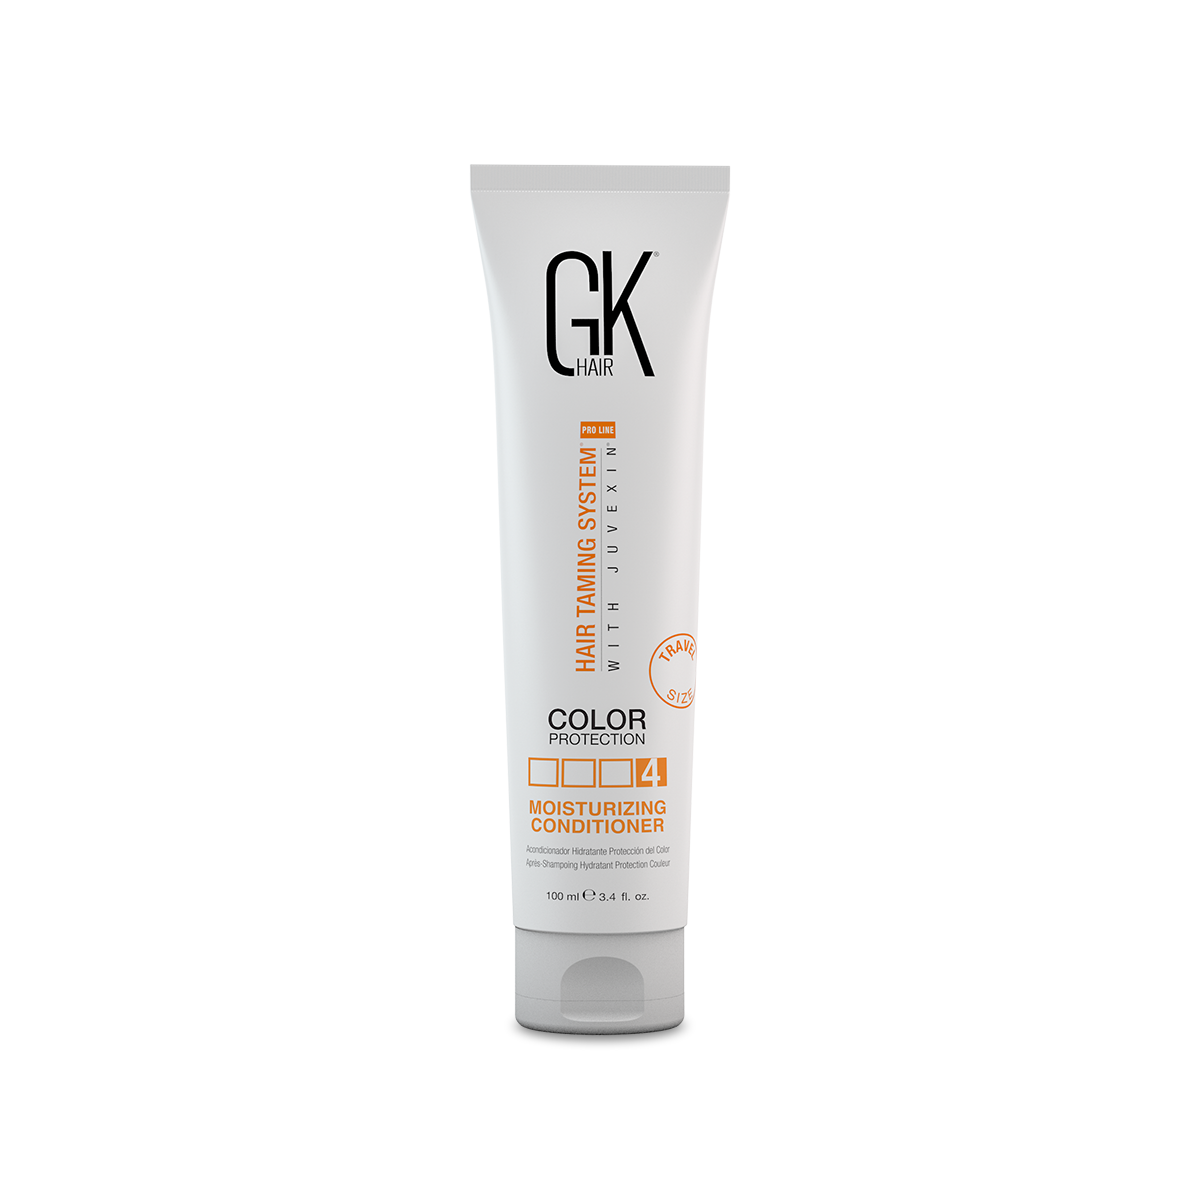 Moisturizing Conditioner | Hair Care Products | GK Hair